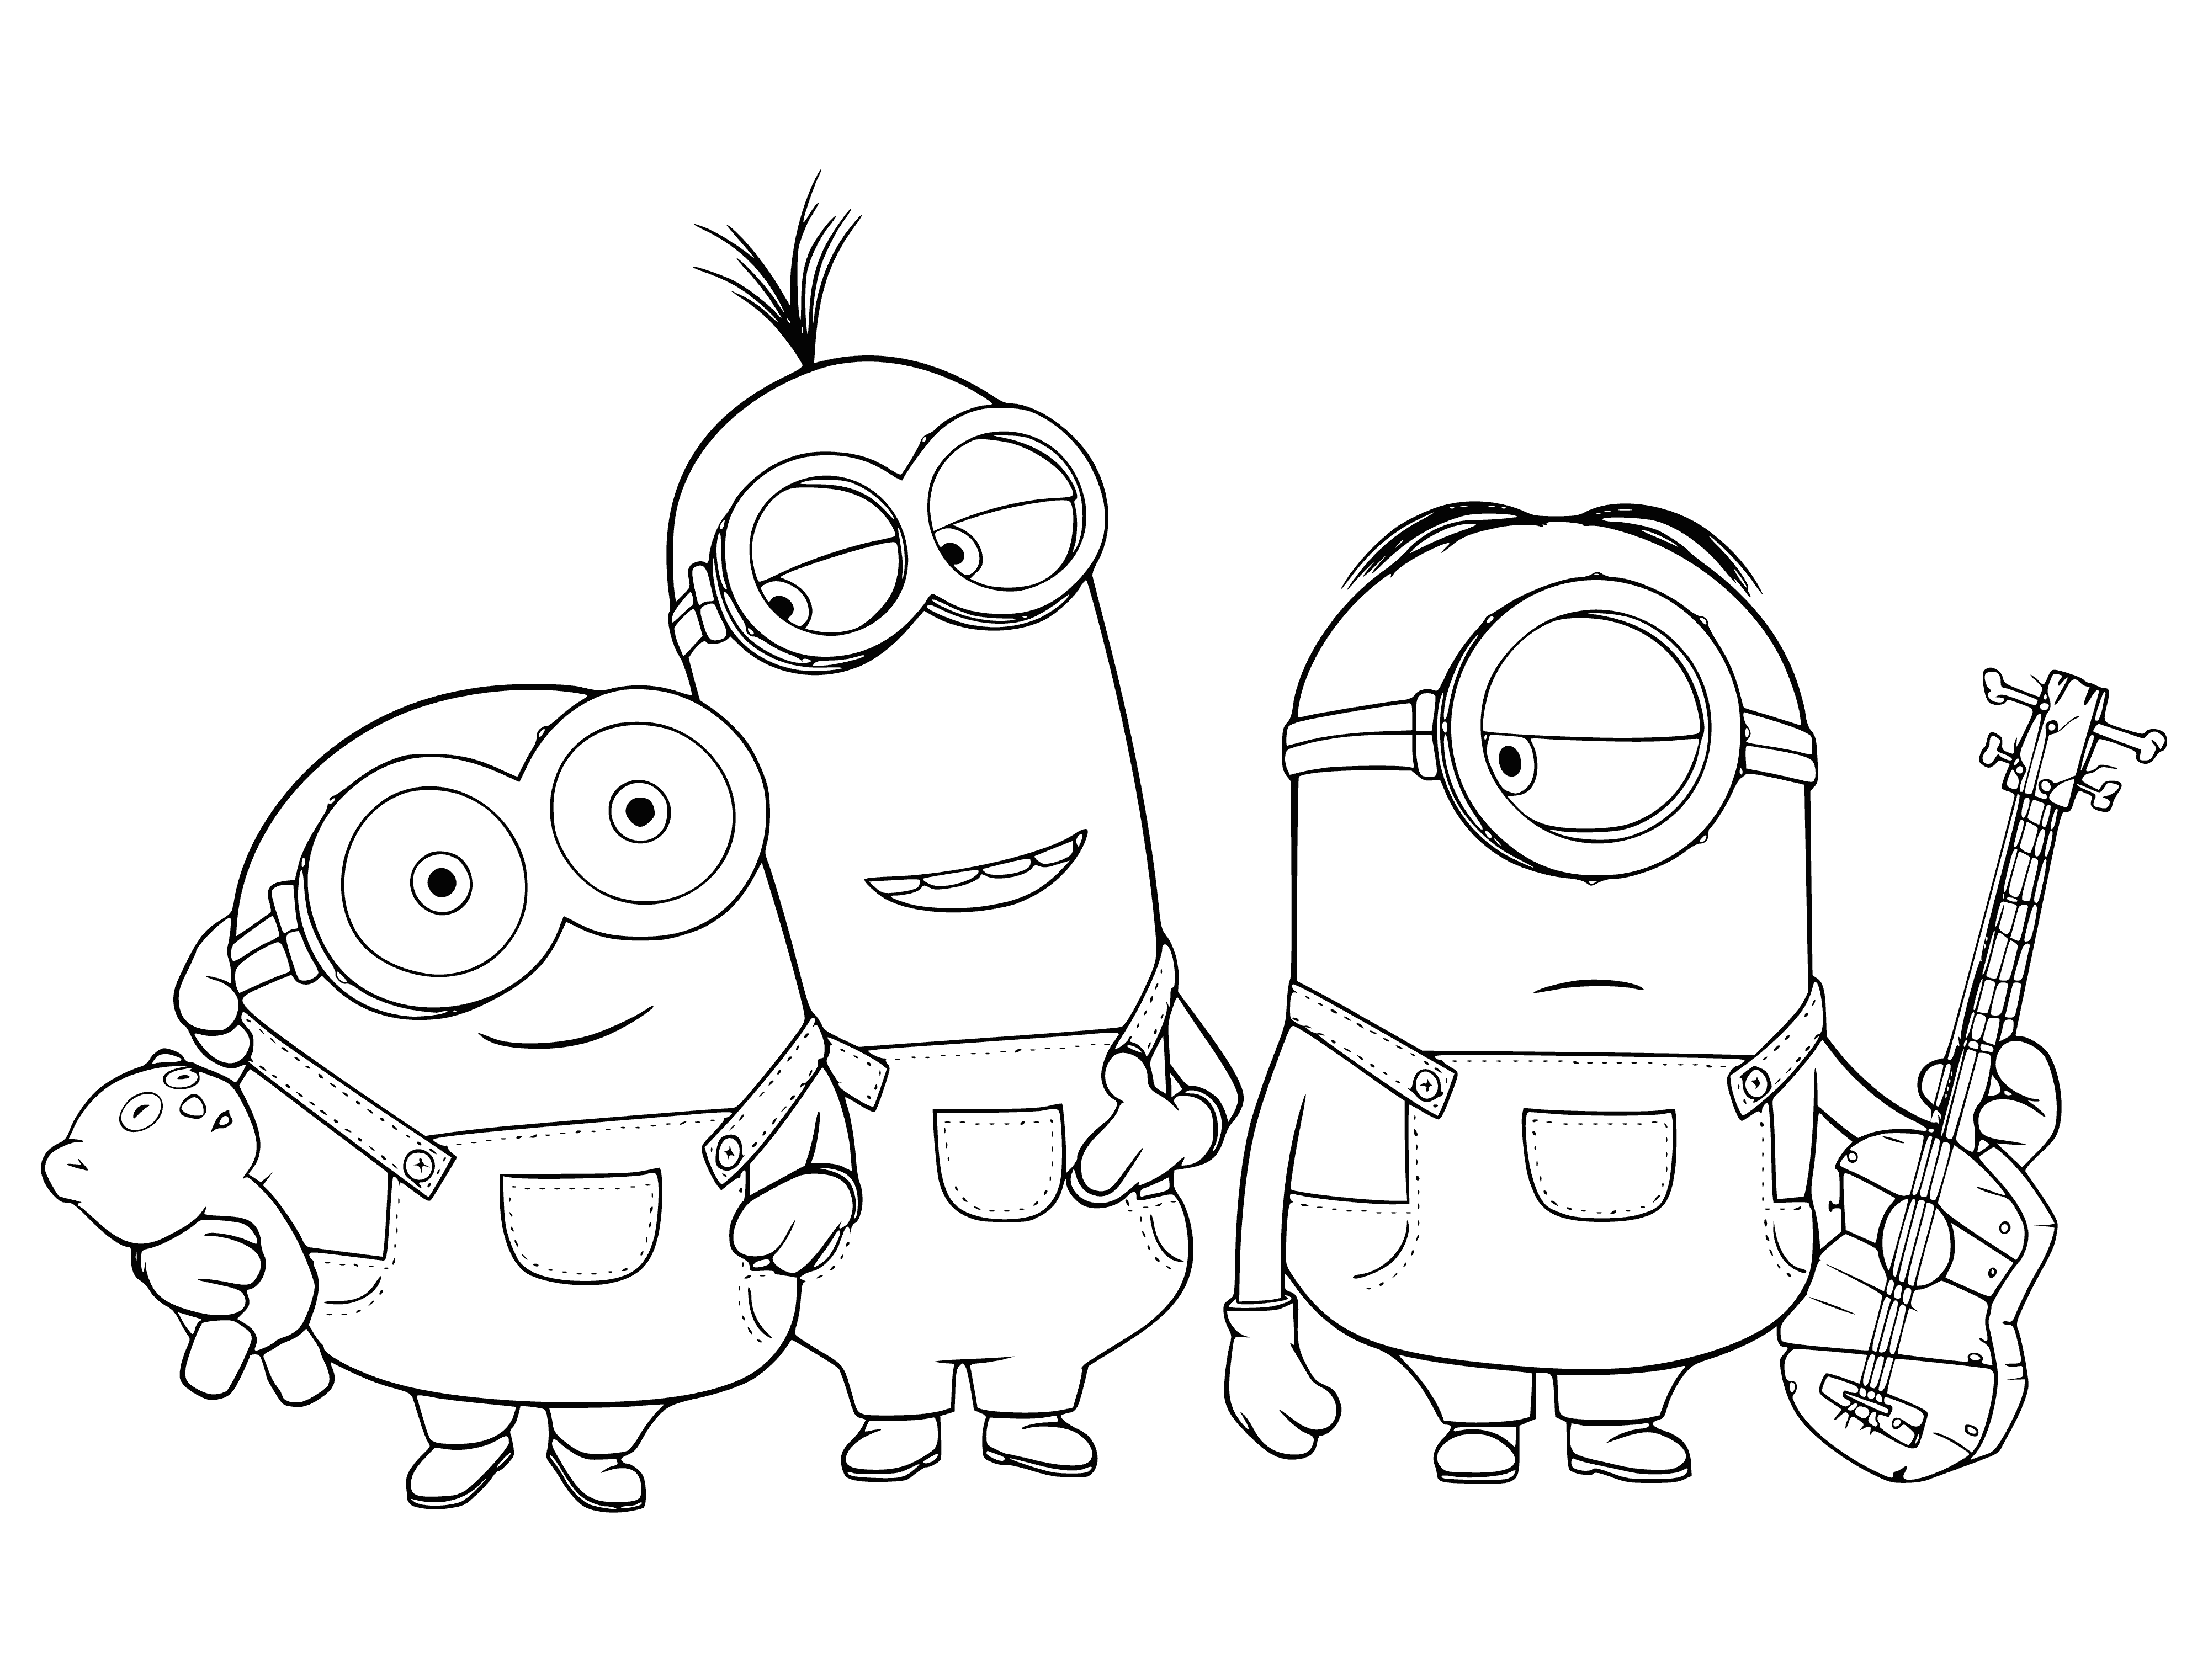 coloring page: Three Minions: Bob, Kevin, and Stewart. All wearing blue overalls, yellow skin, 2 eyes, small noses & mouths. Arms & legs proportional to body.